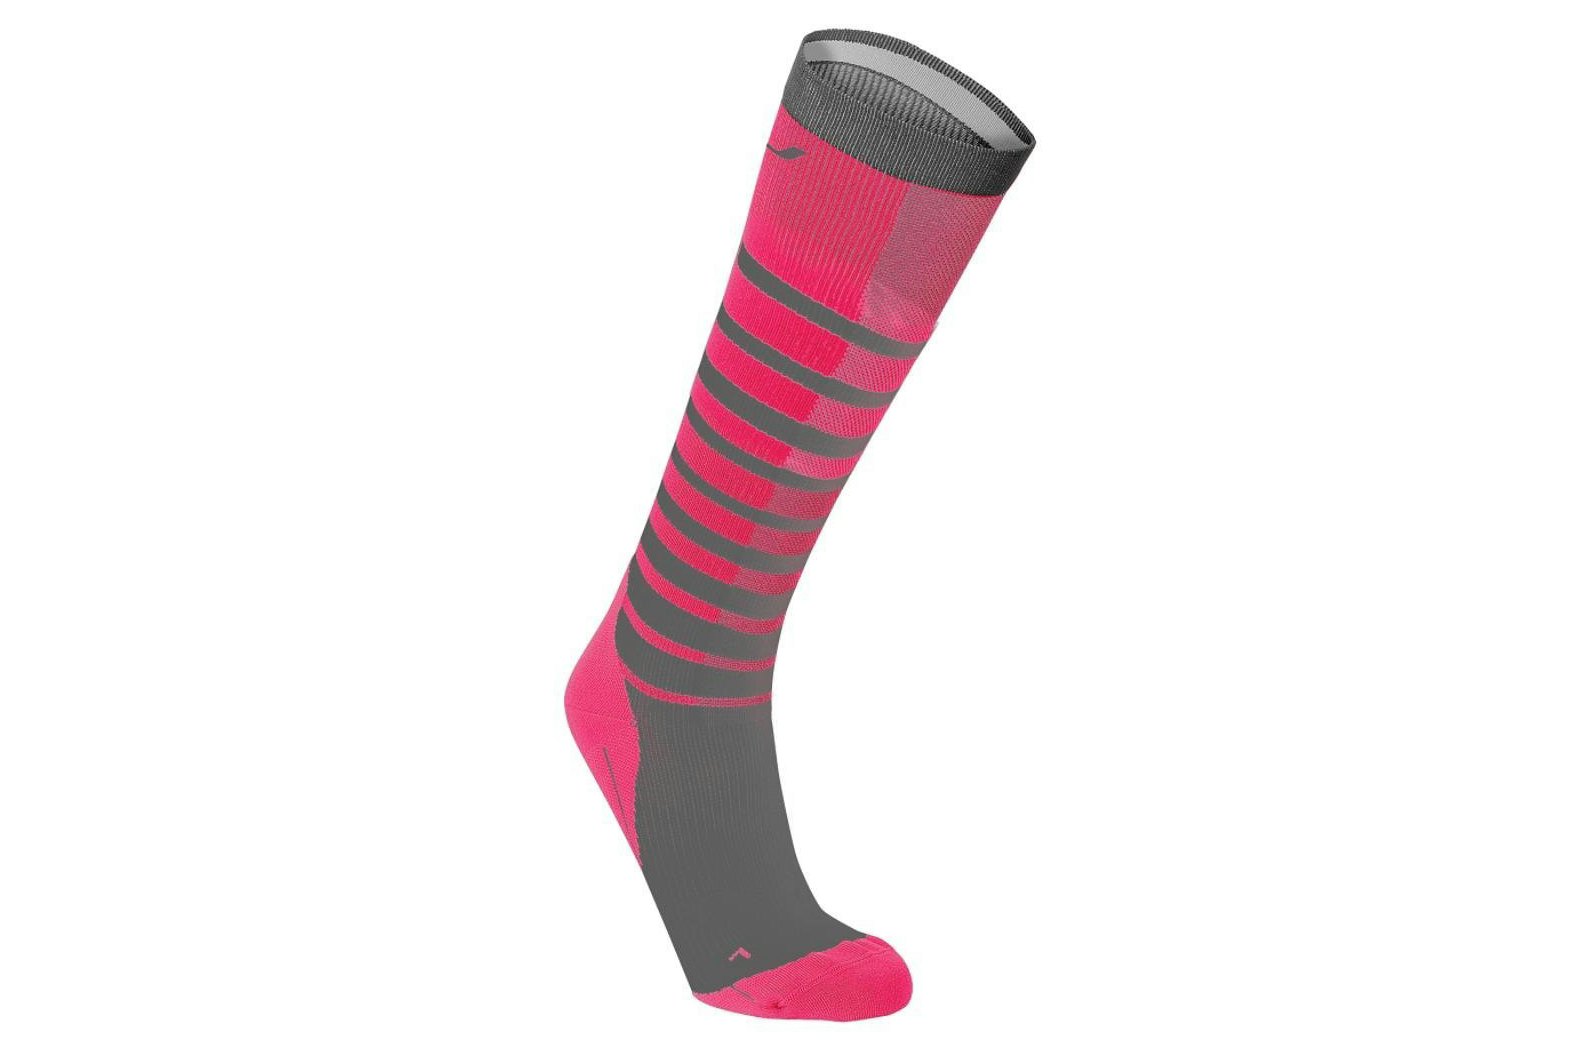 Fytto Compression Socks Size Chart